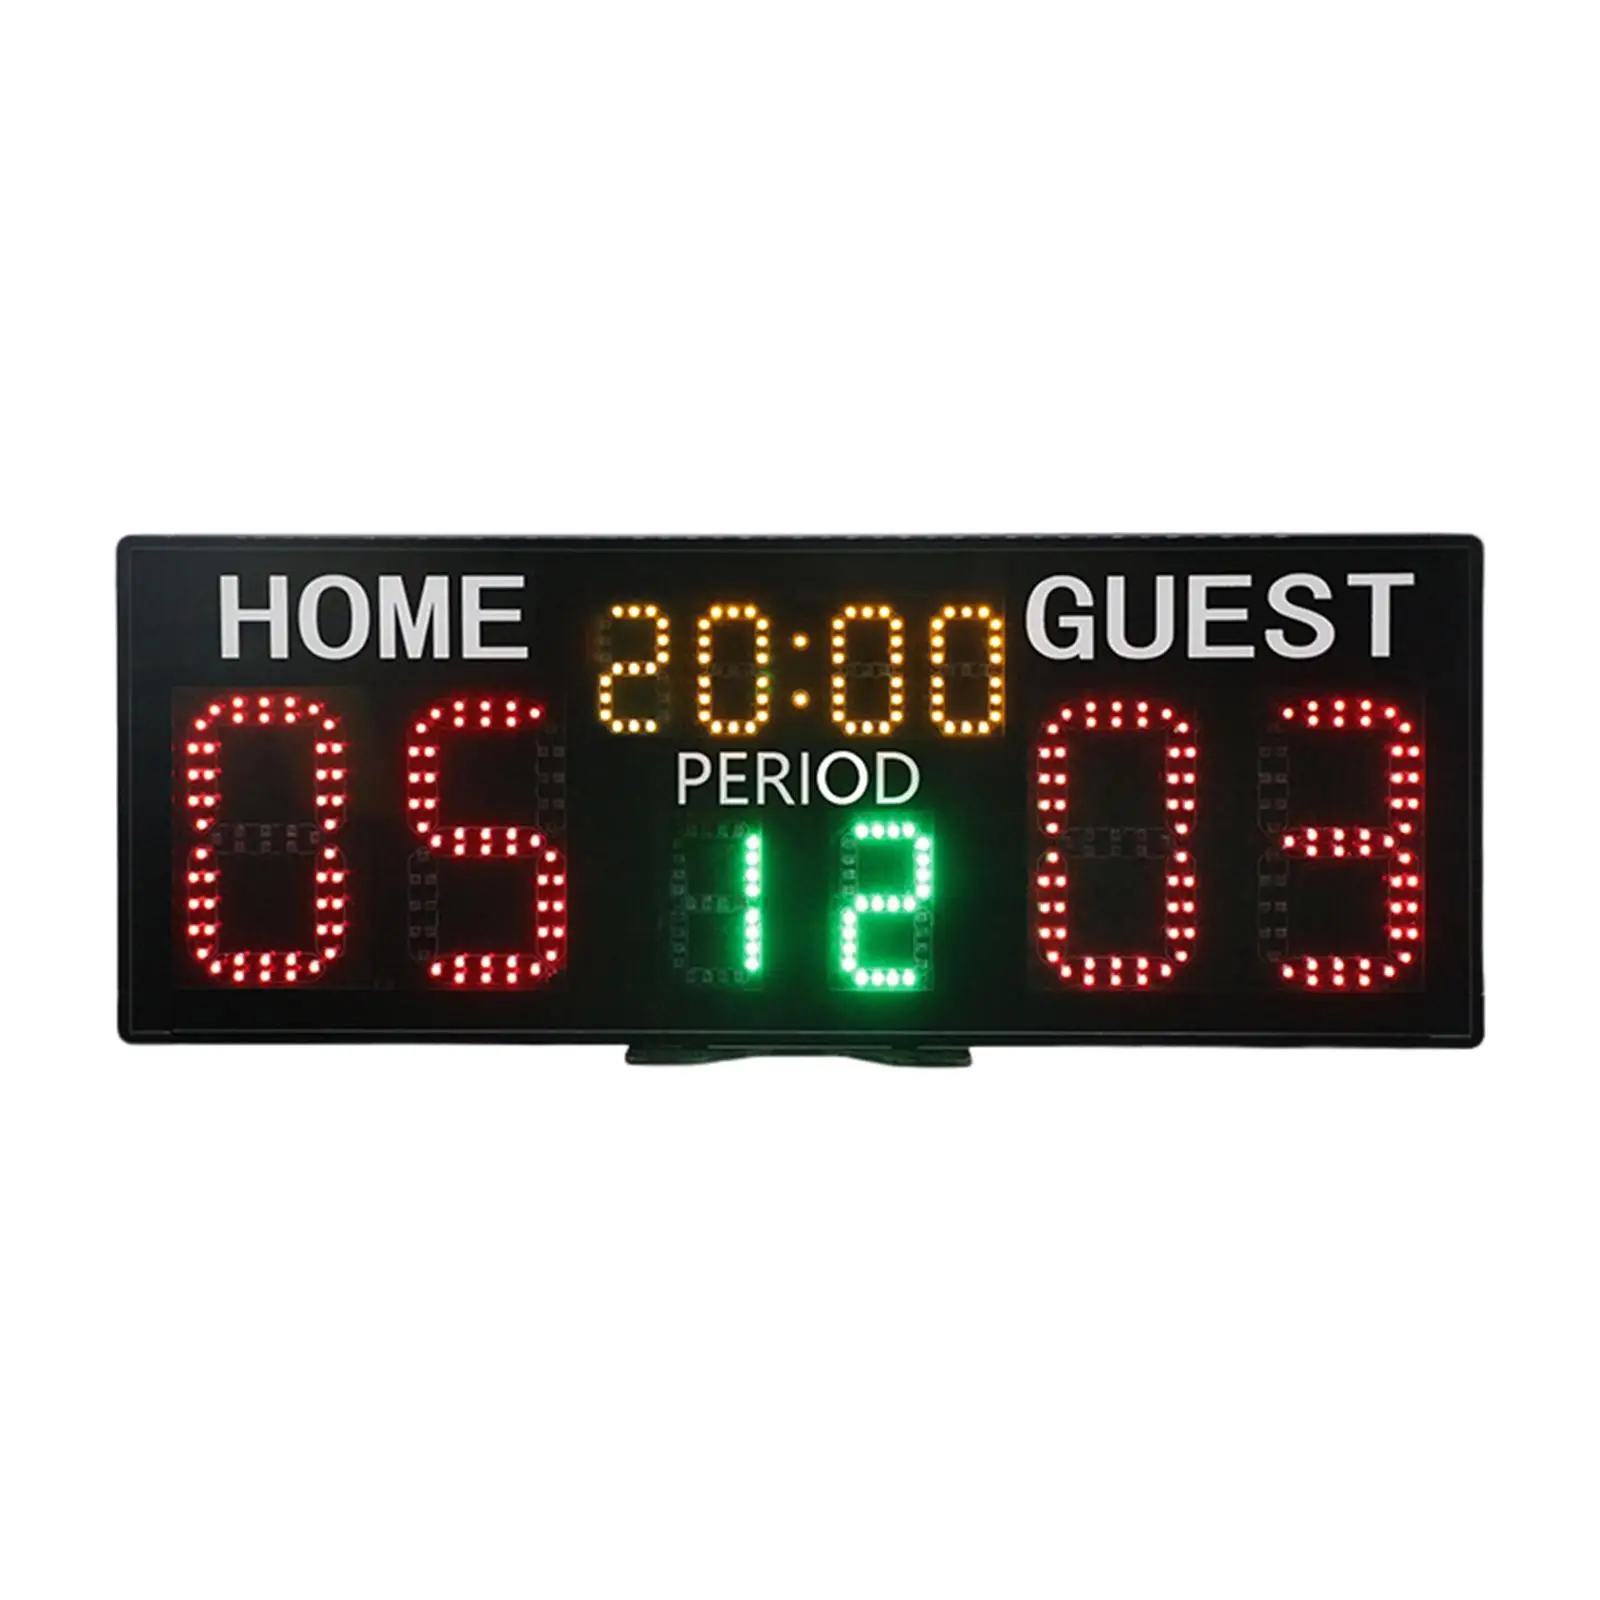 Electronic Scoreboard Home Guest Professional Digital Score Board Tennis Score Keeper for Soccer Table Tennis Volleyball Games